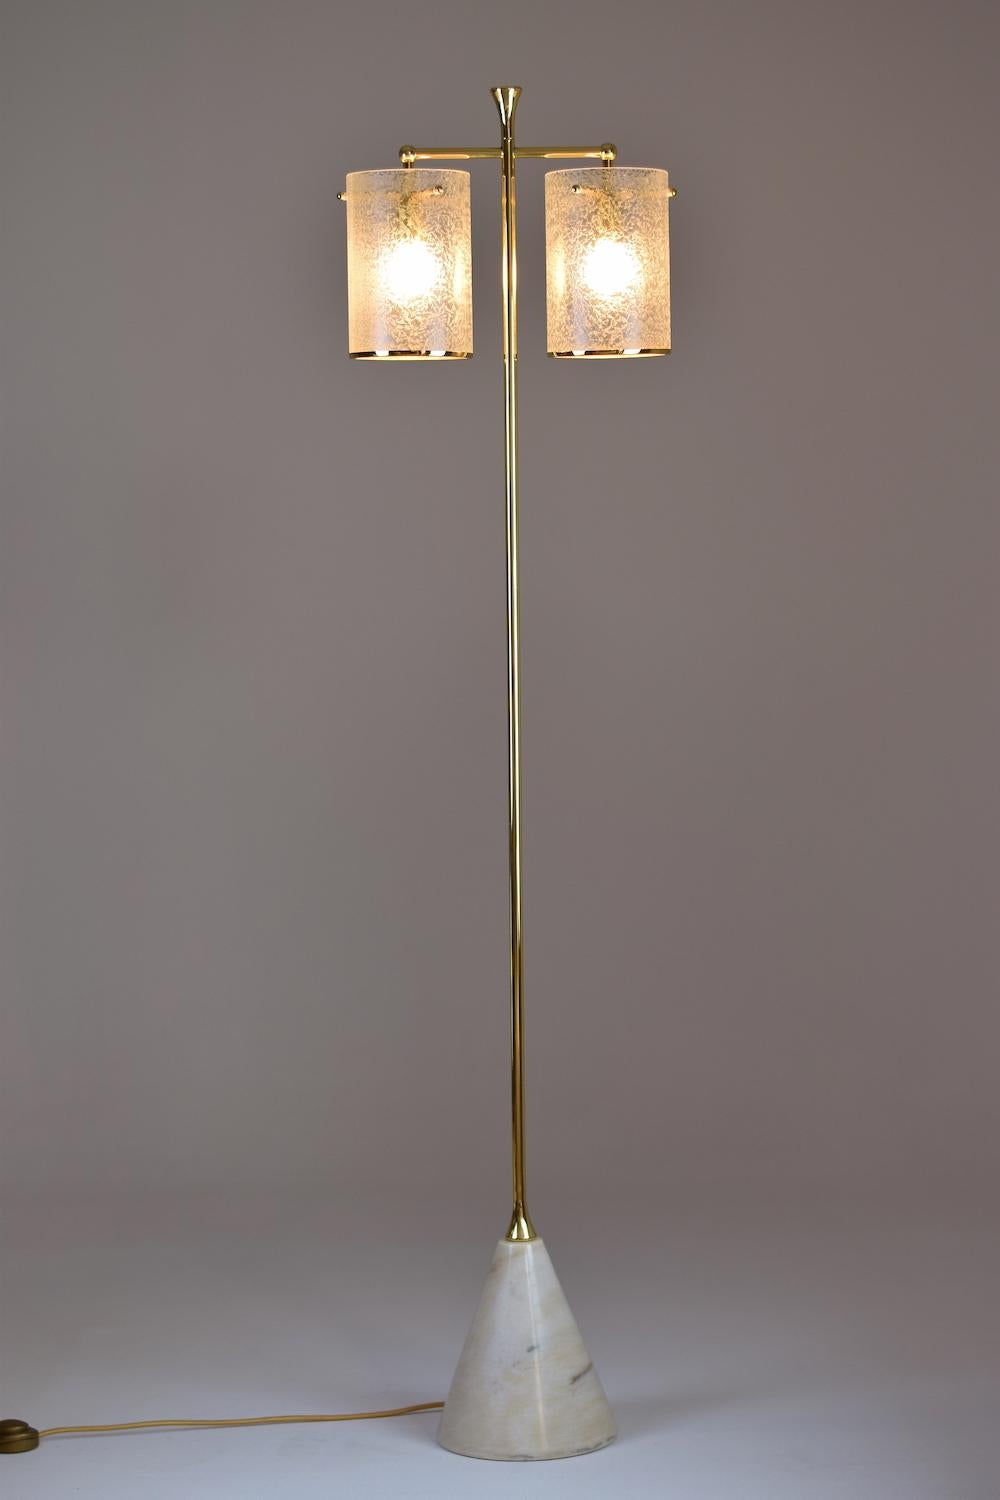 The Ido-F5 floor lamp is composed of givré glass cylinder shades with delicate brass rims. The double shade light is available in different shades: glass, wicker or fabric. The marble base can be colored in green or white.

2x60 W Max E14
230 V -